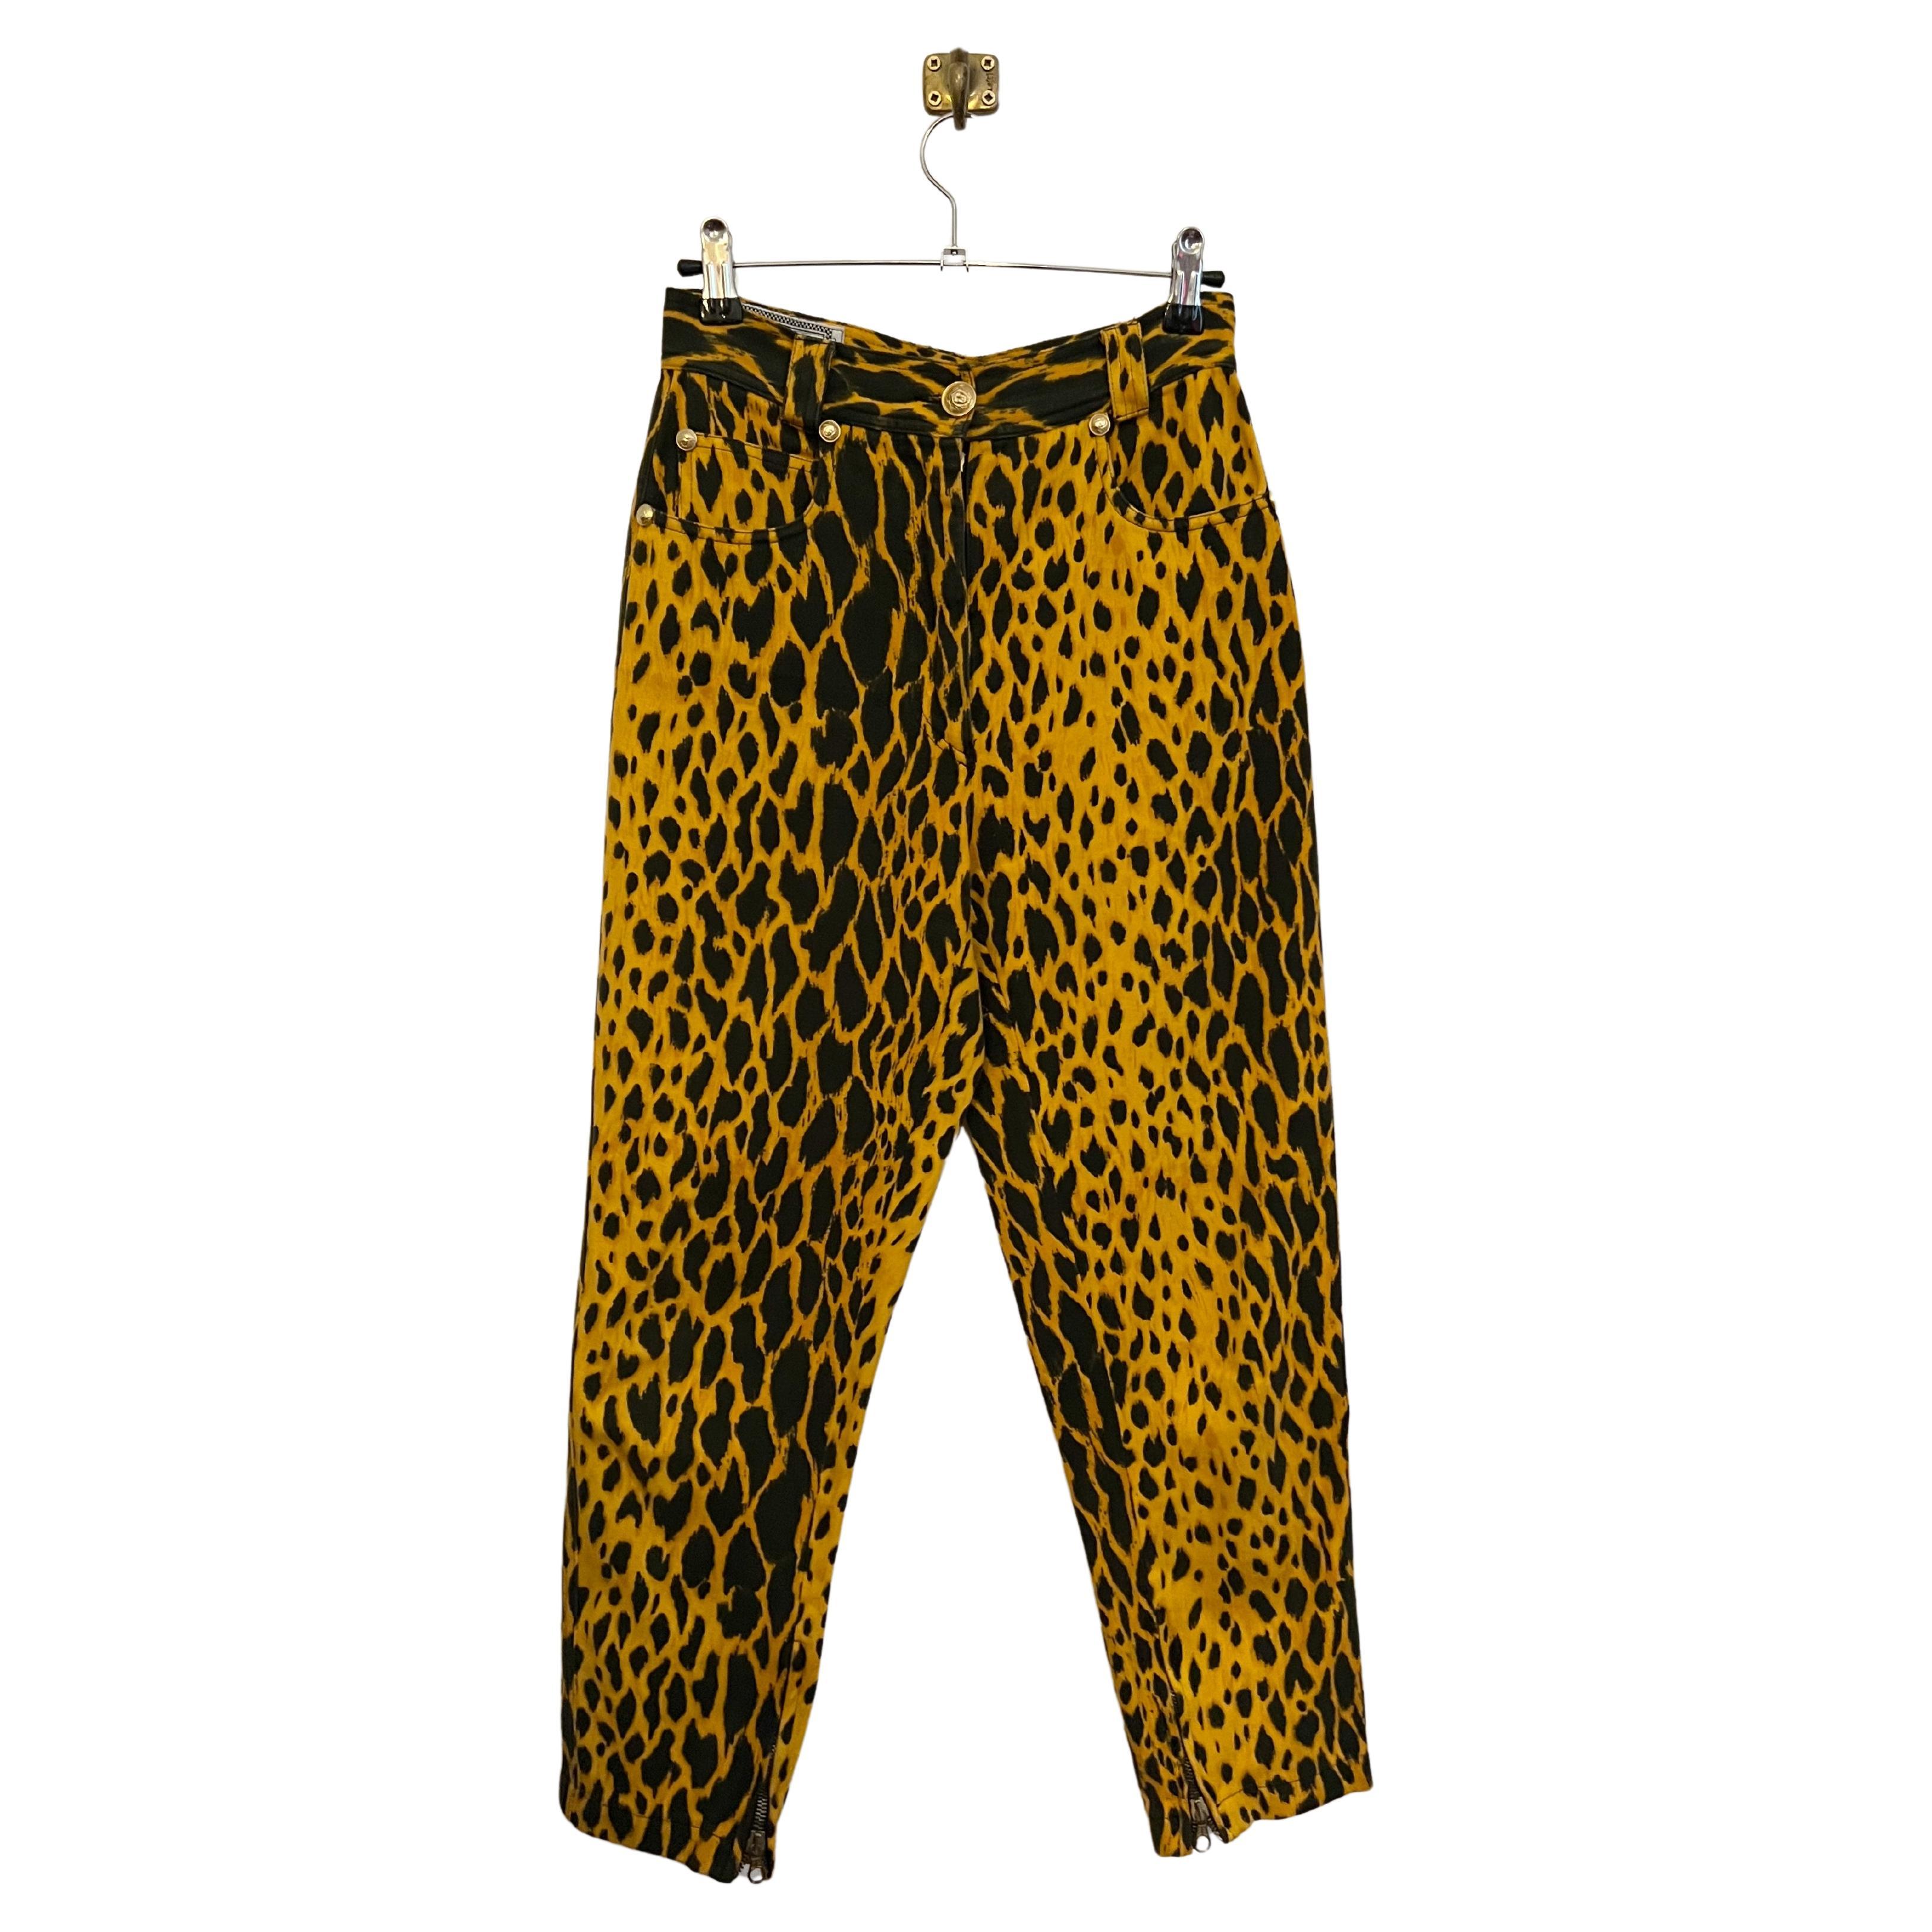 Spring 1992 Gianni Versace Runway Cheetah Leopard High waisted patterned Jeans For Sale